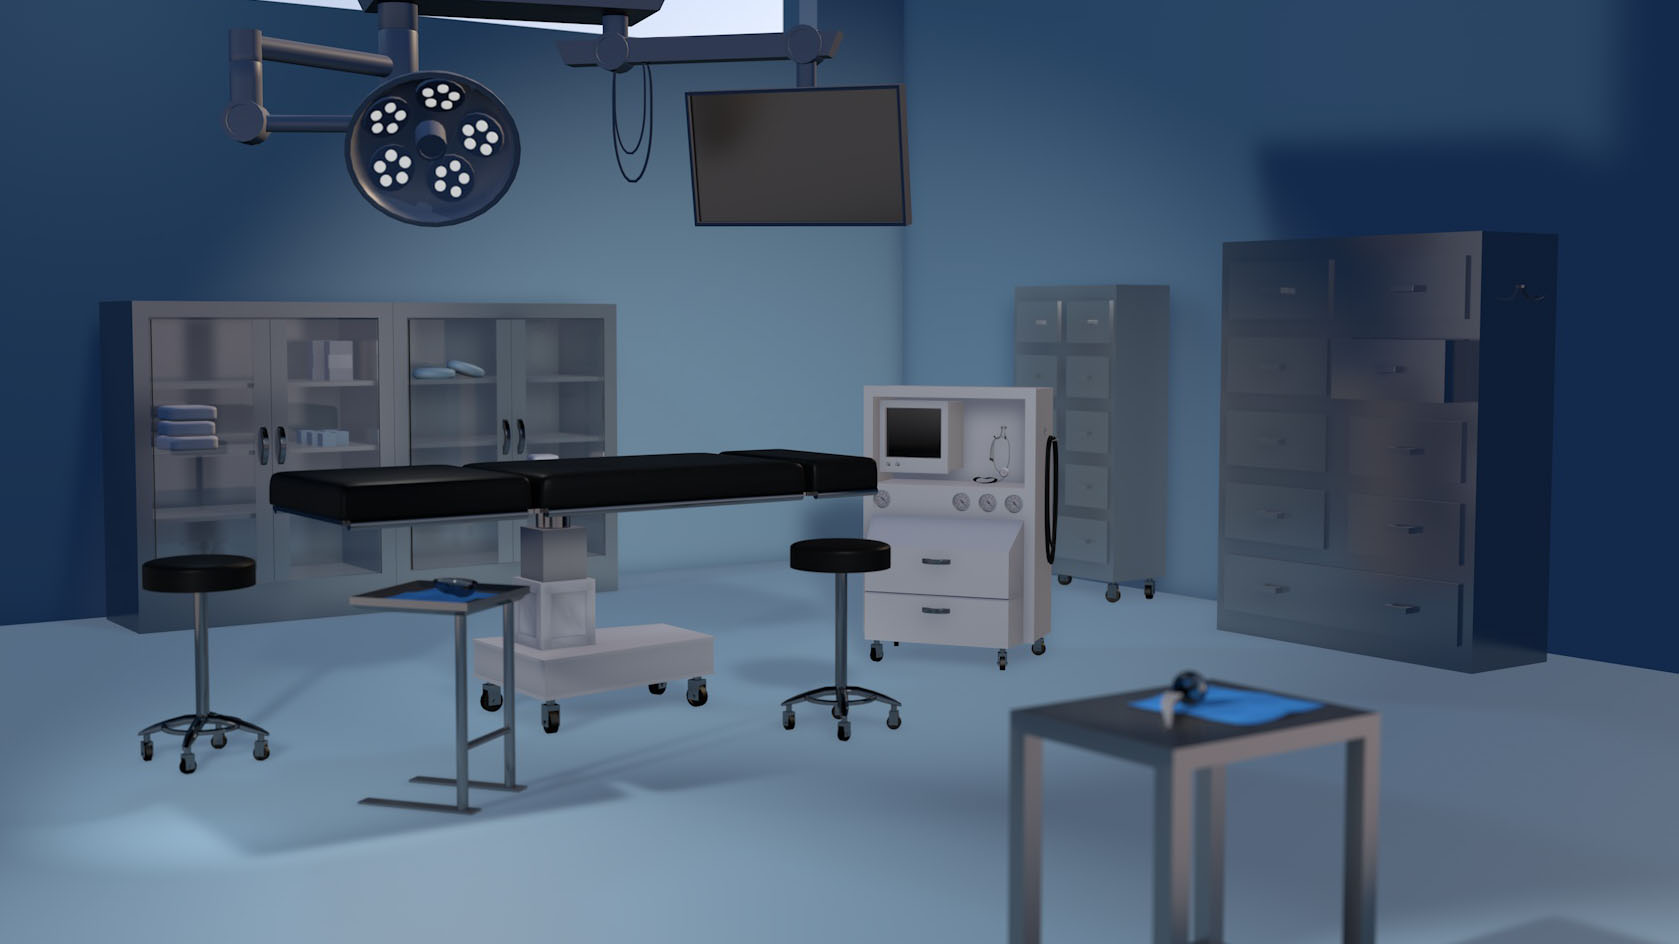 An illustration of a surgery room.